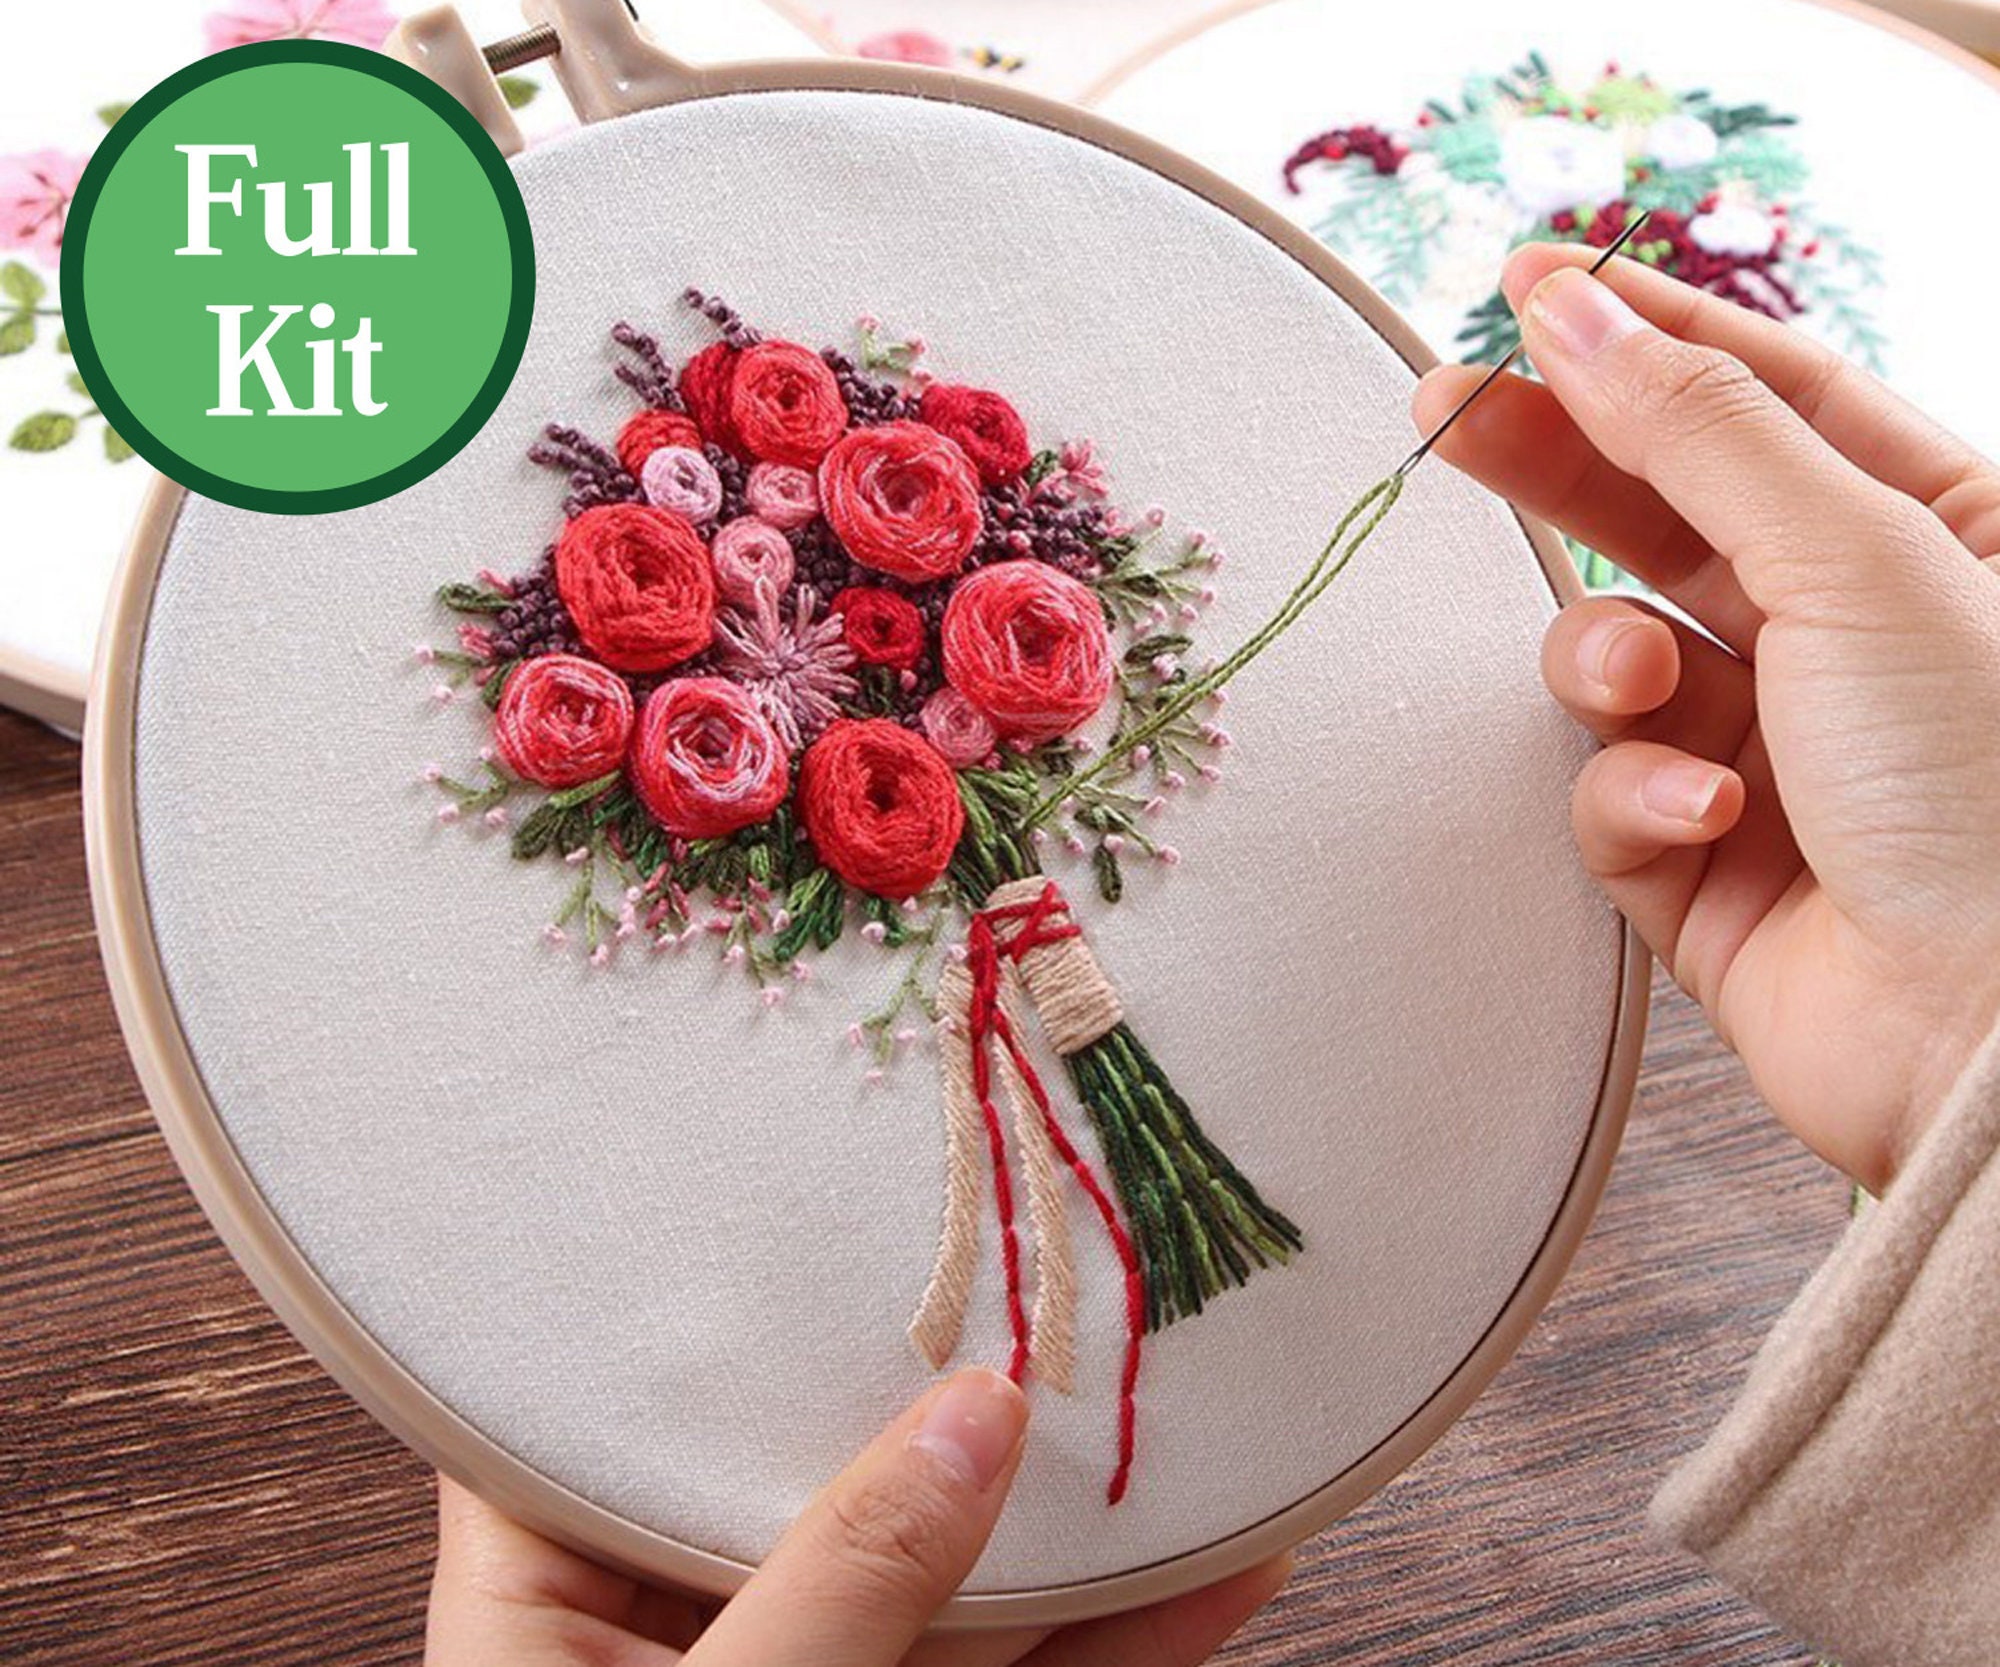 Embroidery Kit for Beginners, Pre Printed Embroidery Kit for Adults and  Kids, 6 Hoop Floral Woman Hand Embroidery Kits UK, Craft Gift 